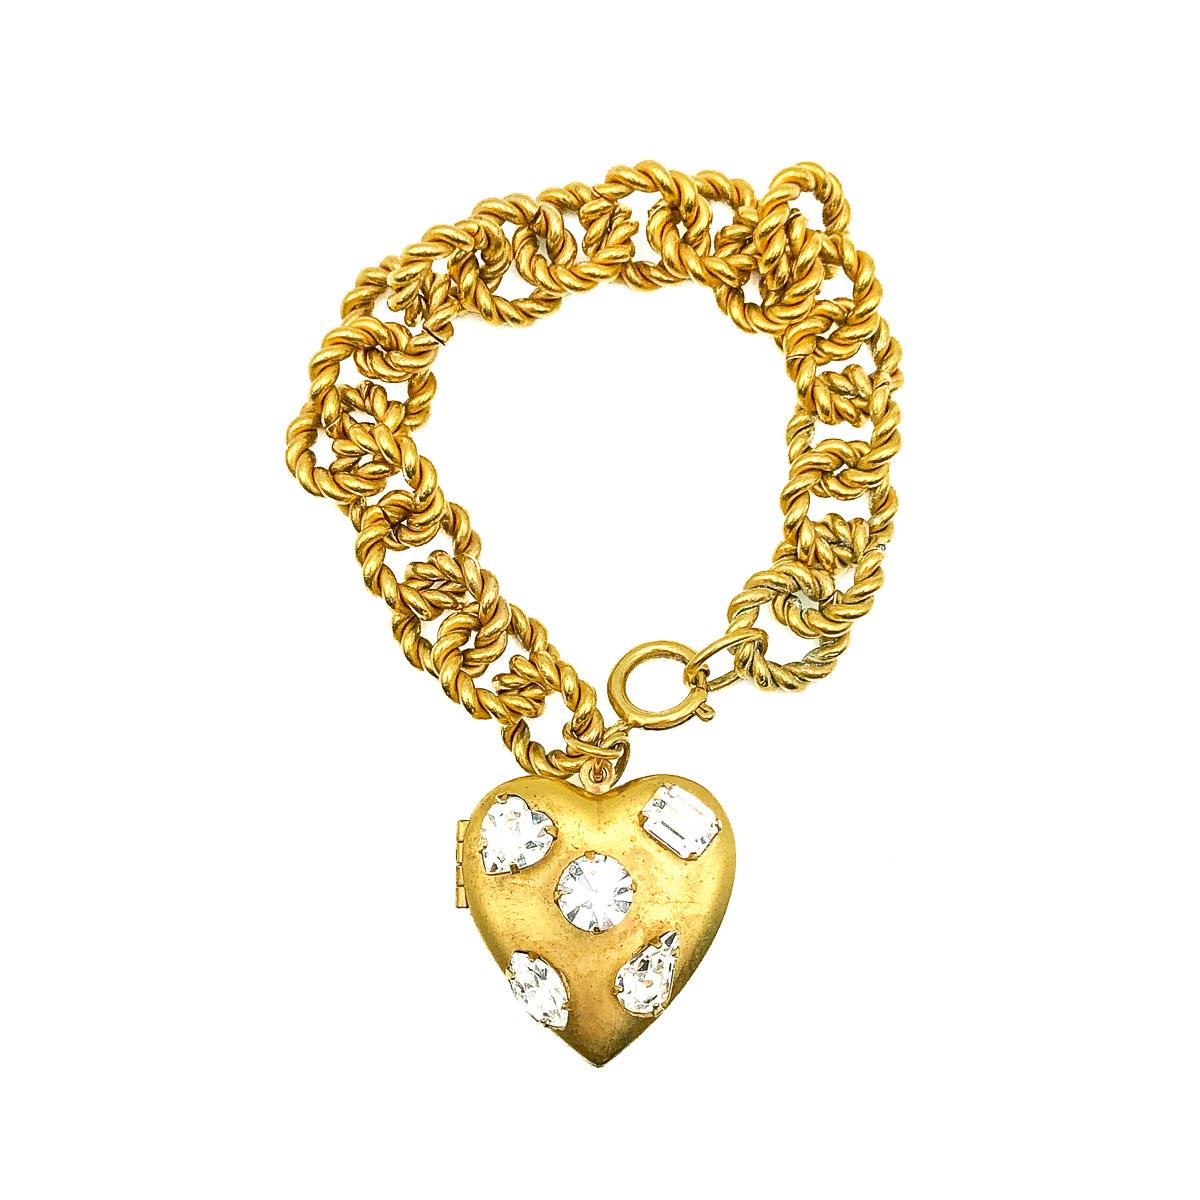 A striking statement Vintage Heart Locket Bracelet with fabulous attention to detail. Crafted in gold plated metal and crystal stones in fancy cuts. A large opening heart locket is adorned with five stones each in a different cut on the front and a